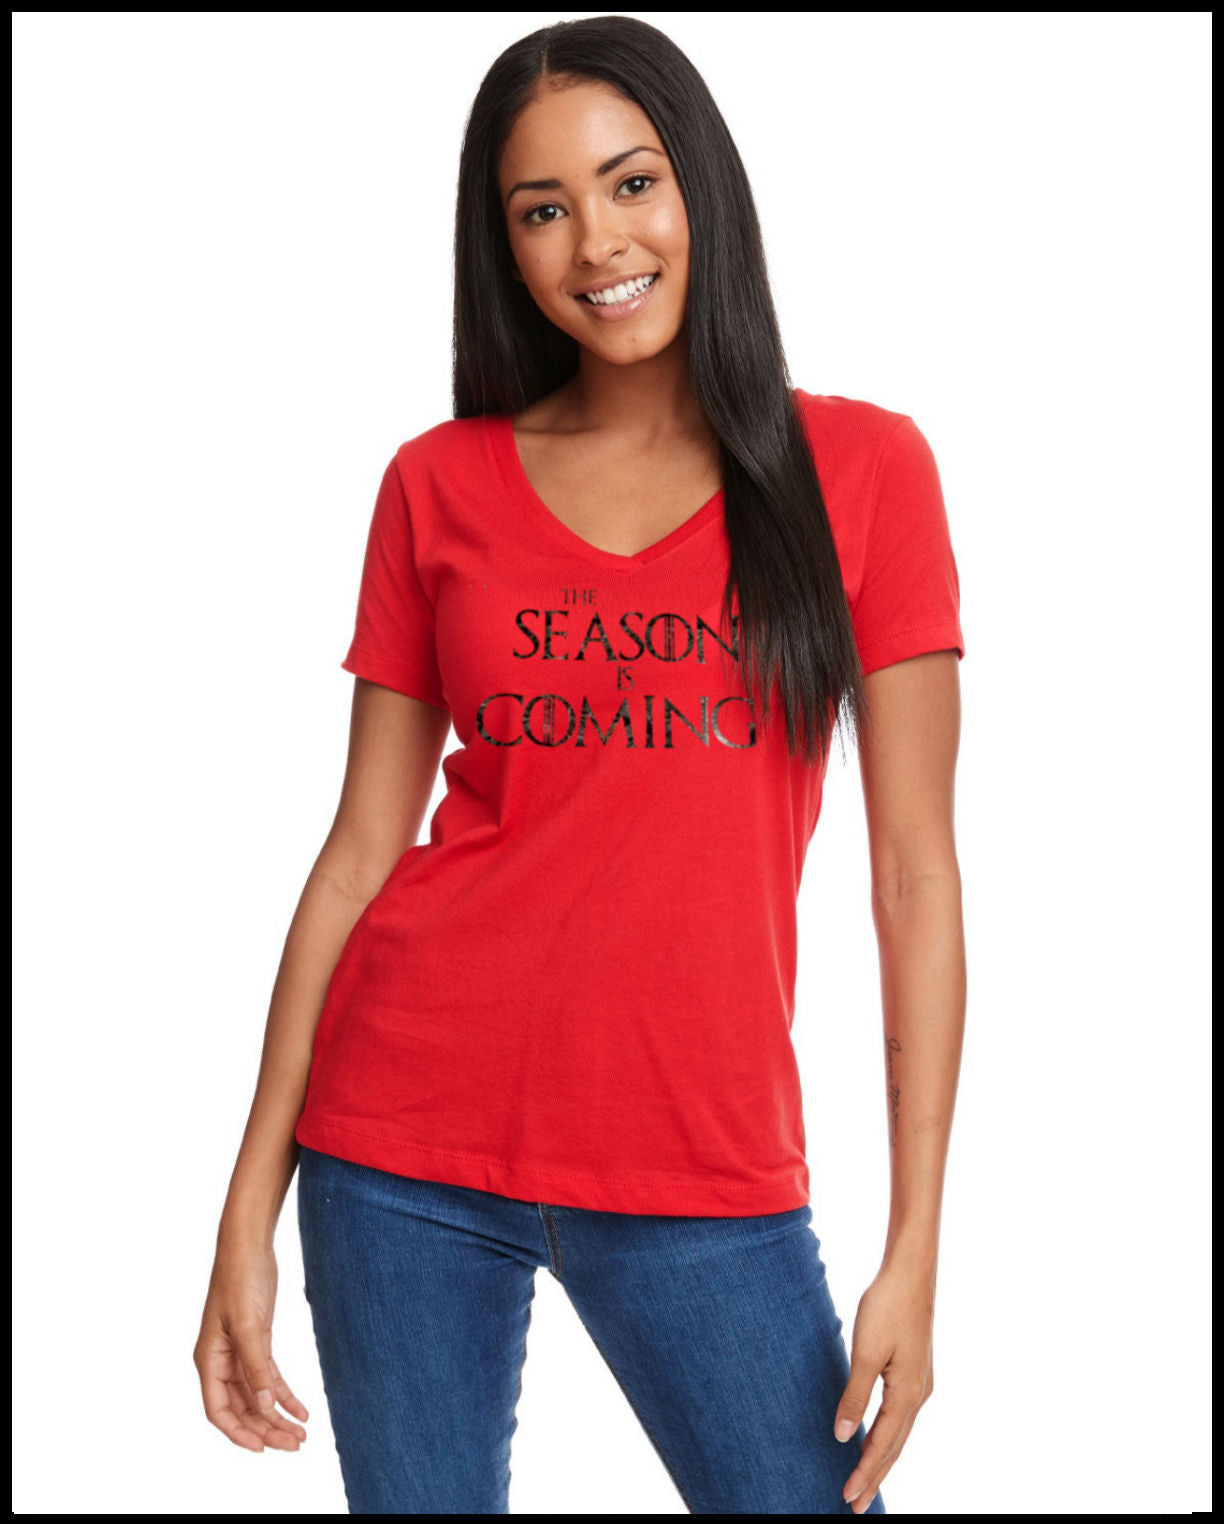 The Season Is Coming Ladies Cut V-Neck Red & Hunters Camo T-Shirt